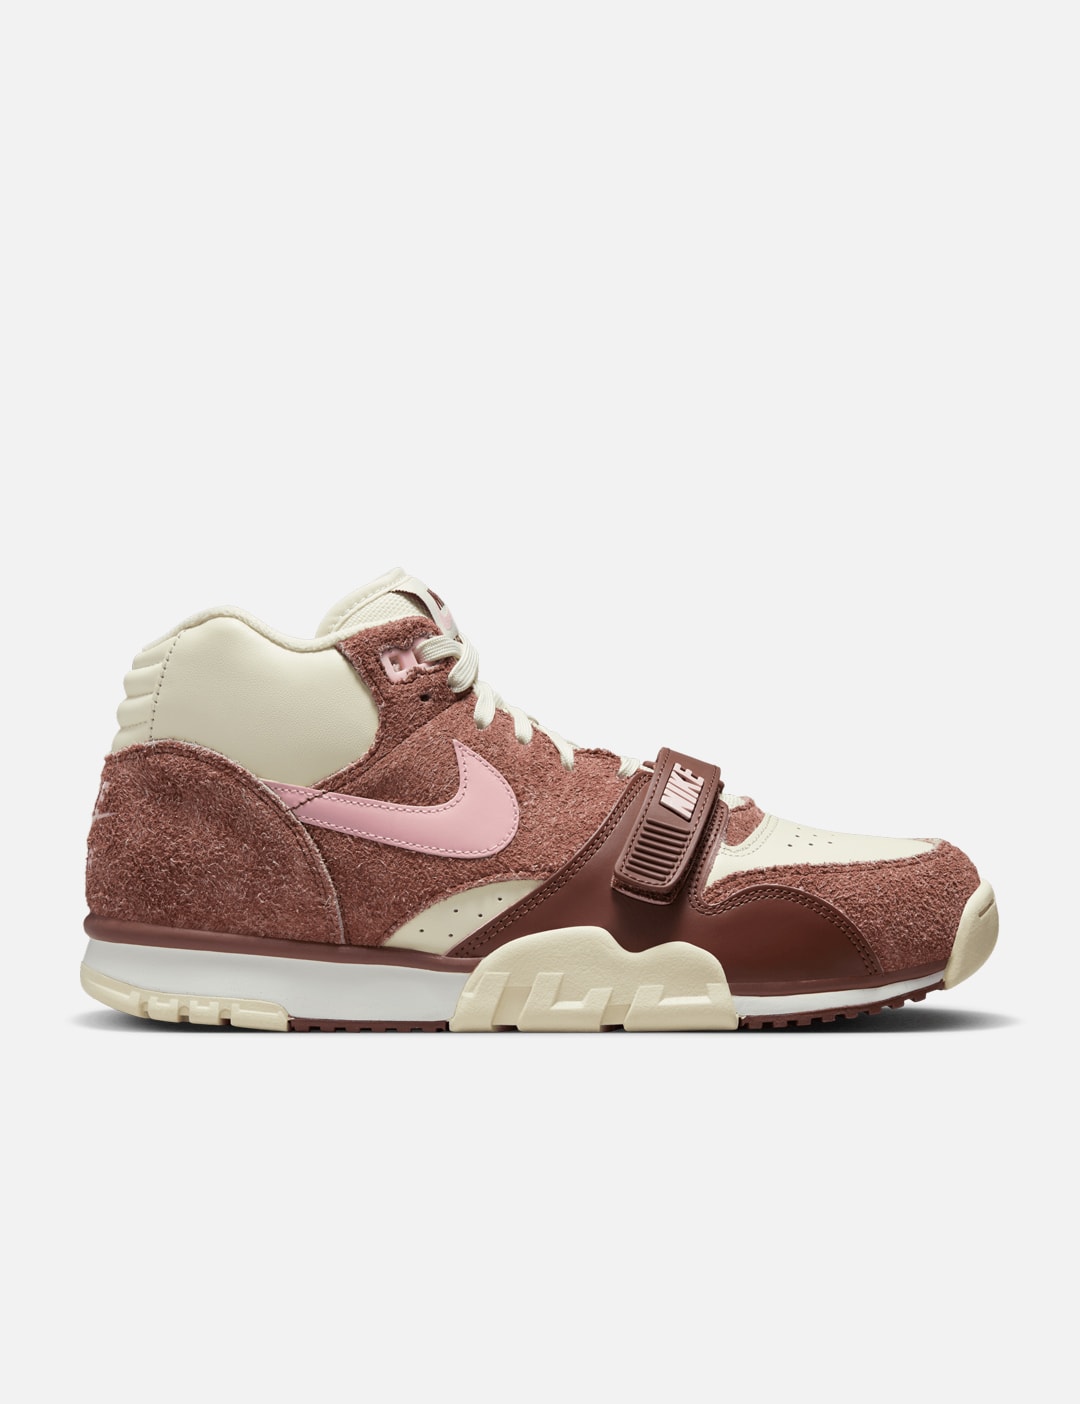 Nike - Nike Air Trainer 1 'Dark Pony' | HBX - Curated Fashion and Hypebeast